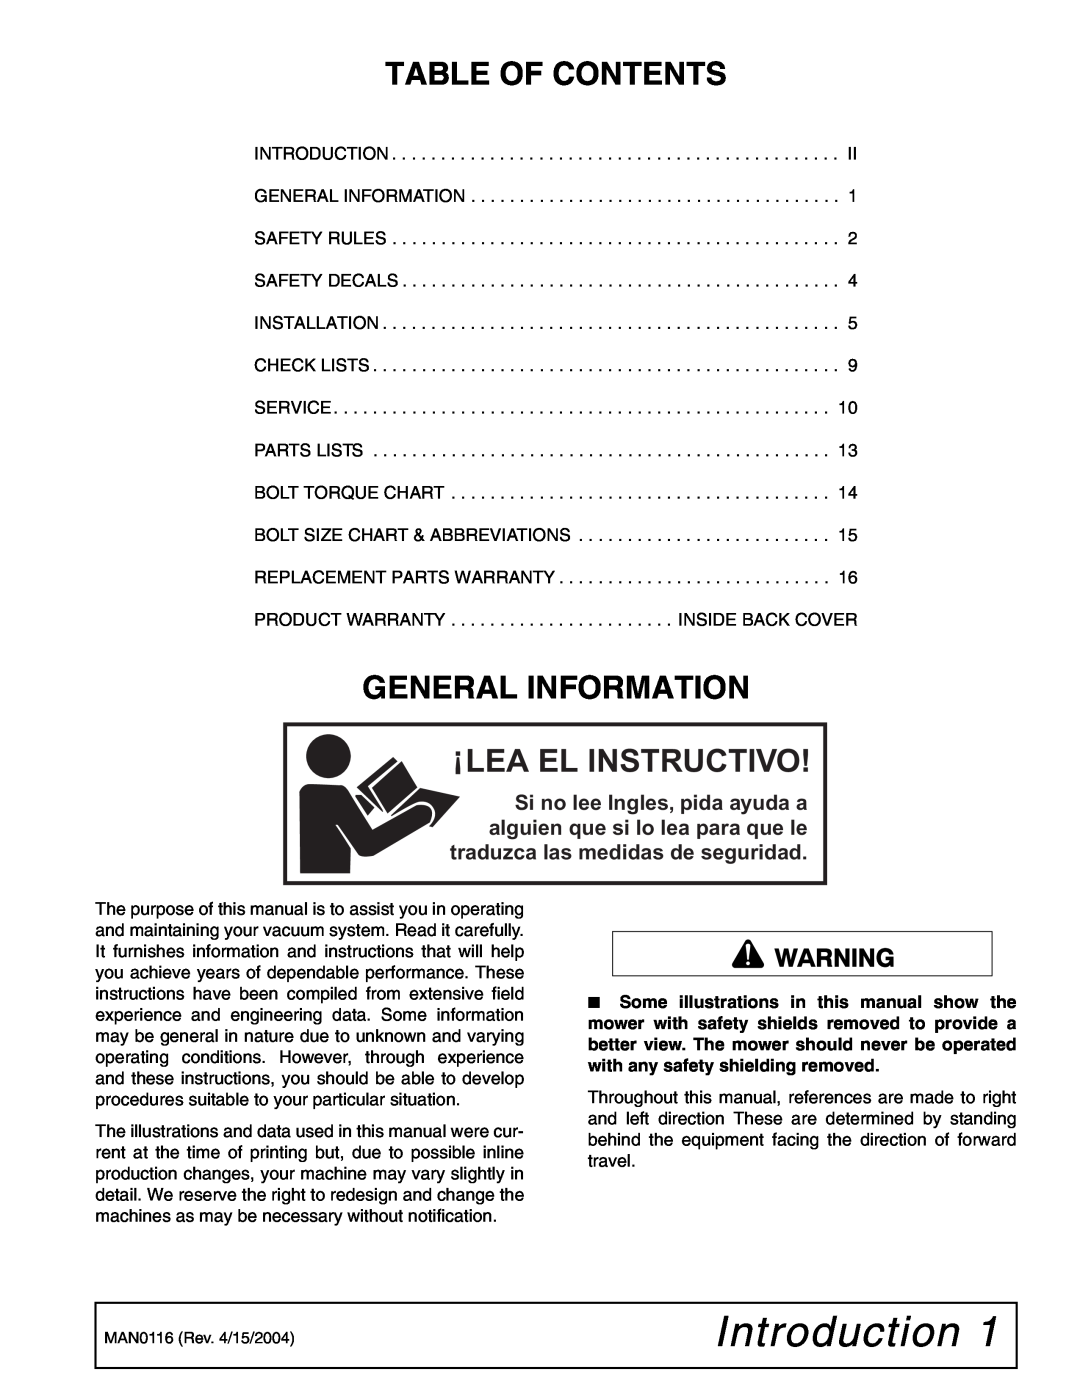 Woods Equipment D6121T, D5221T manual Introduction, Table Of Contents, General Information 